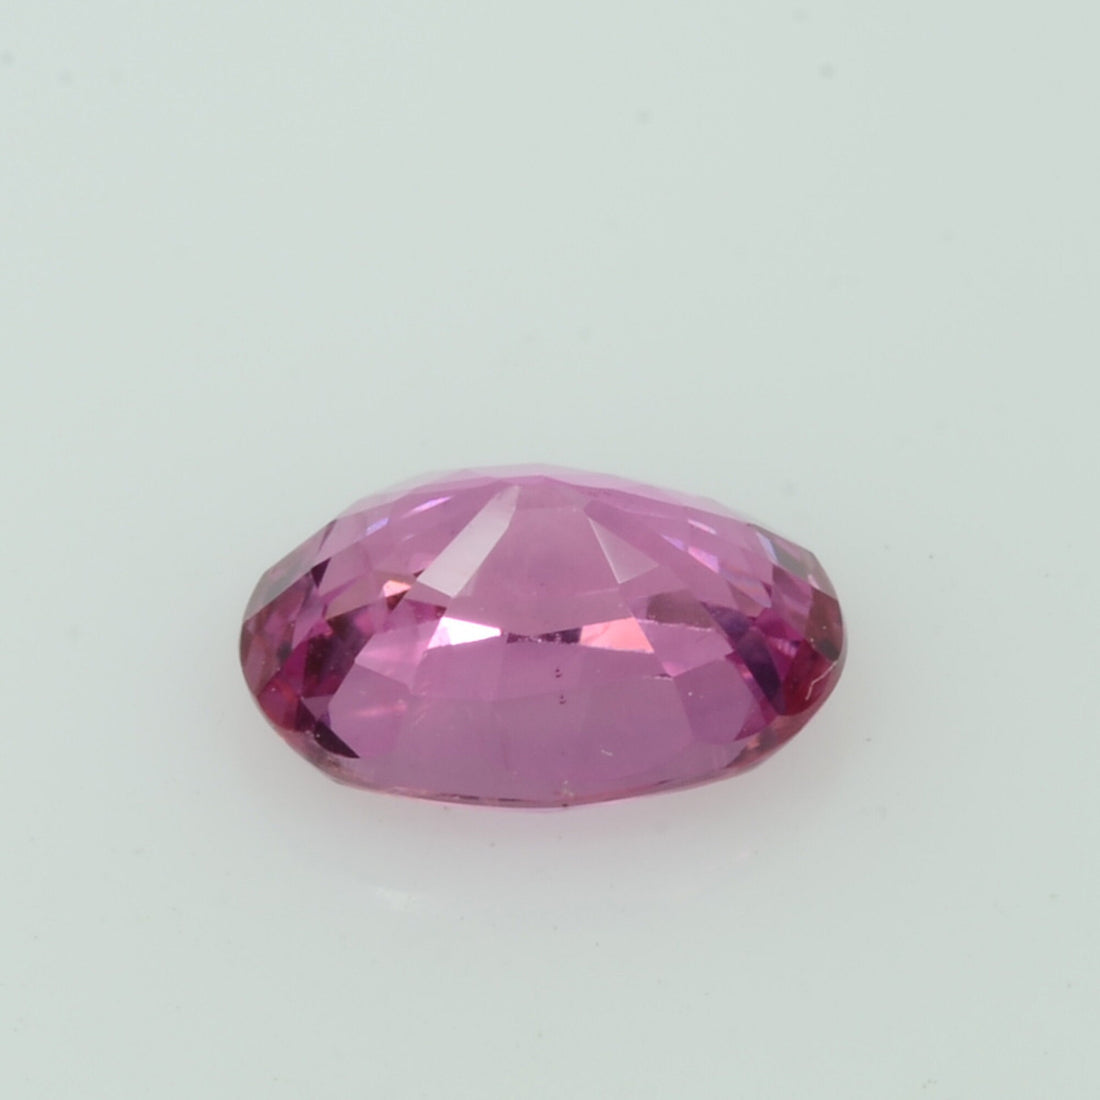 0.91 cts Natural Pink Sapphire Loose Gemstone Oval Cut